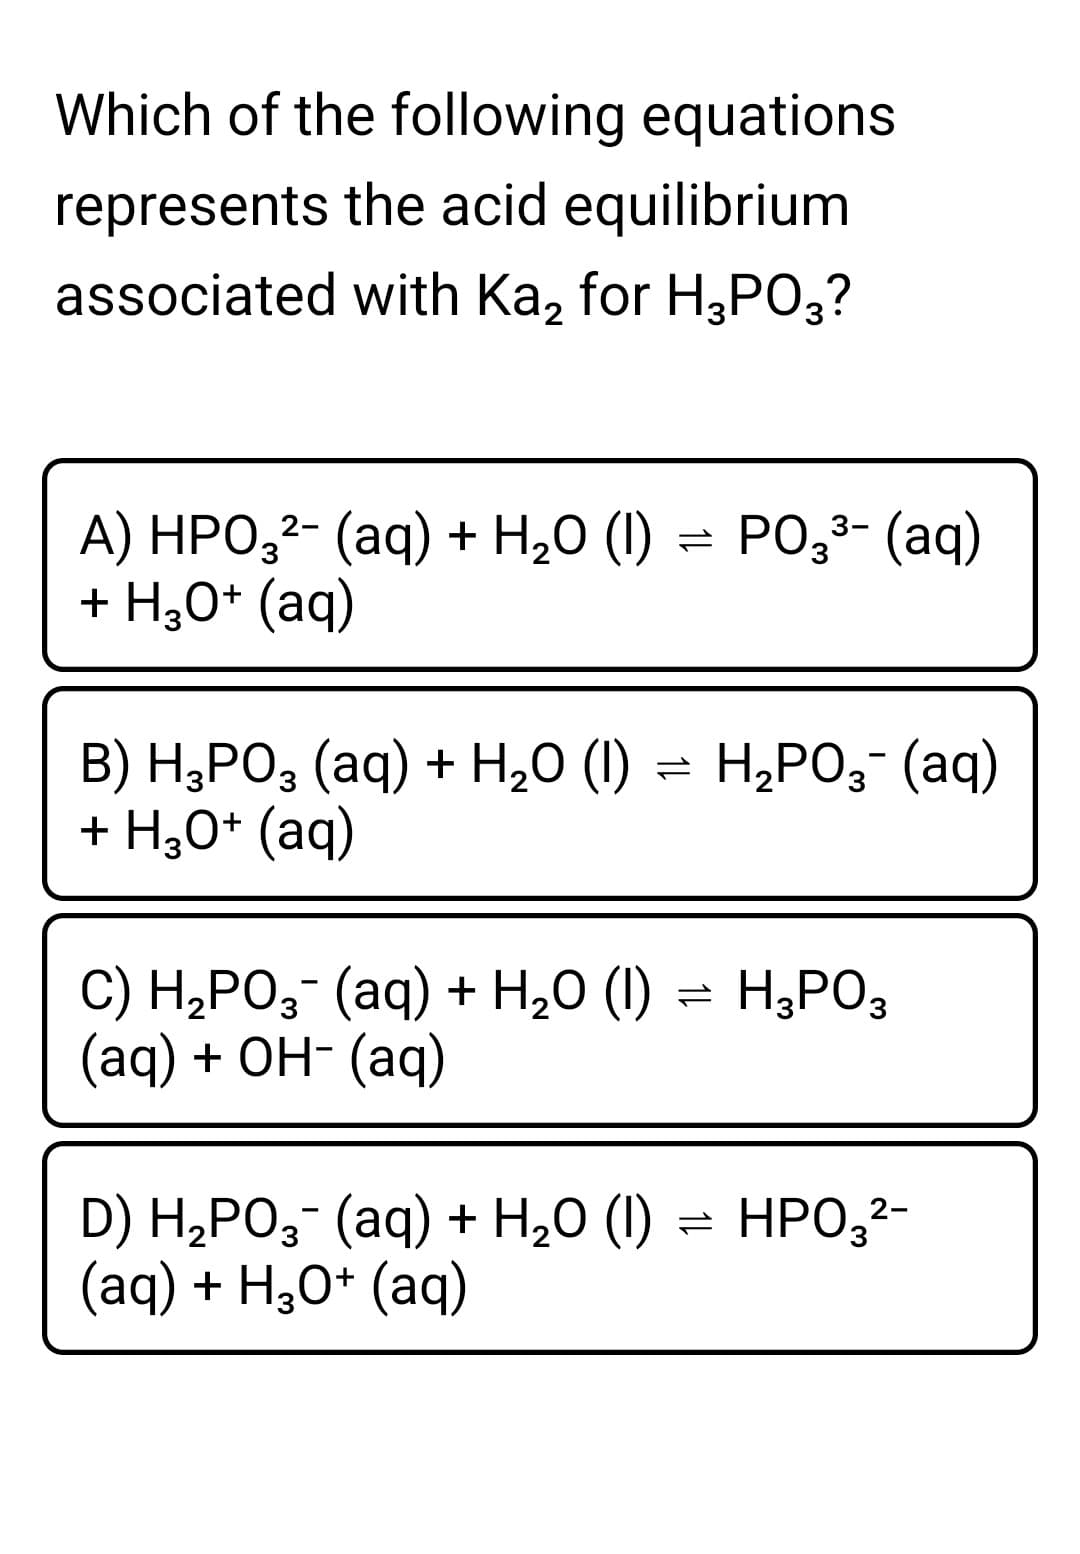 Which of the following equations
represents the acid equilibrium
associated with Ka, for H3PO3?
A) HPO,²- (aq) + H20 (1) = PO;3- (aq)
+ H;0* (aq)
B) H;PO, (aq) + H,0 (1) = H,PO;¯ (aq)
+ H,0* (aq)
= H¿PO;-
C) H,PO,- (aq) + H,0 (1) = H,PO3
(aд) + ОН- (аq)
D) H,РO;- (аq) + H,0 ()
(aq) + H30* (aq)
HPO,2-
